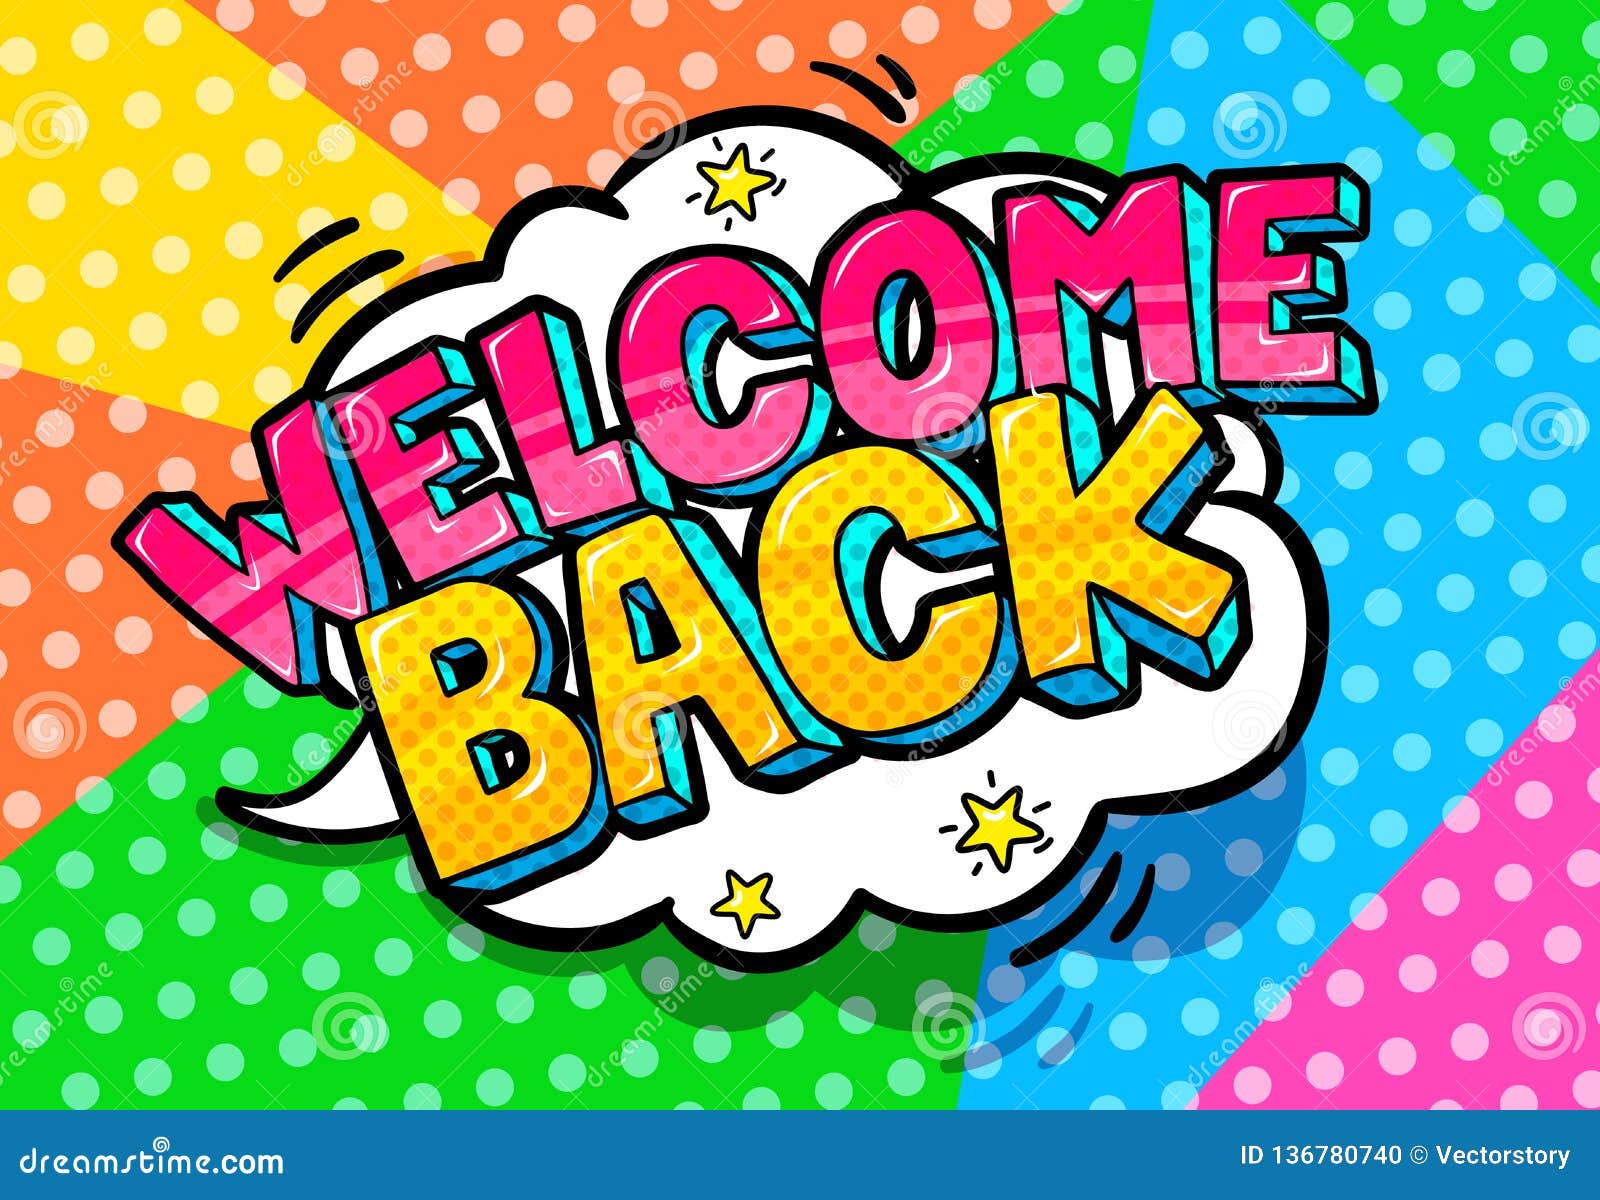 http://thumbs.dreamstime.com/z/welcome-back-lettering-pop-art-style-color-background-comic-speech-bubble-136780740.jpg